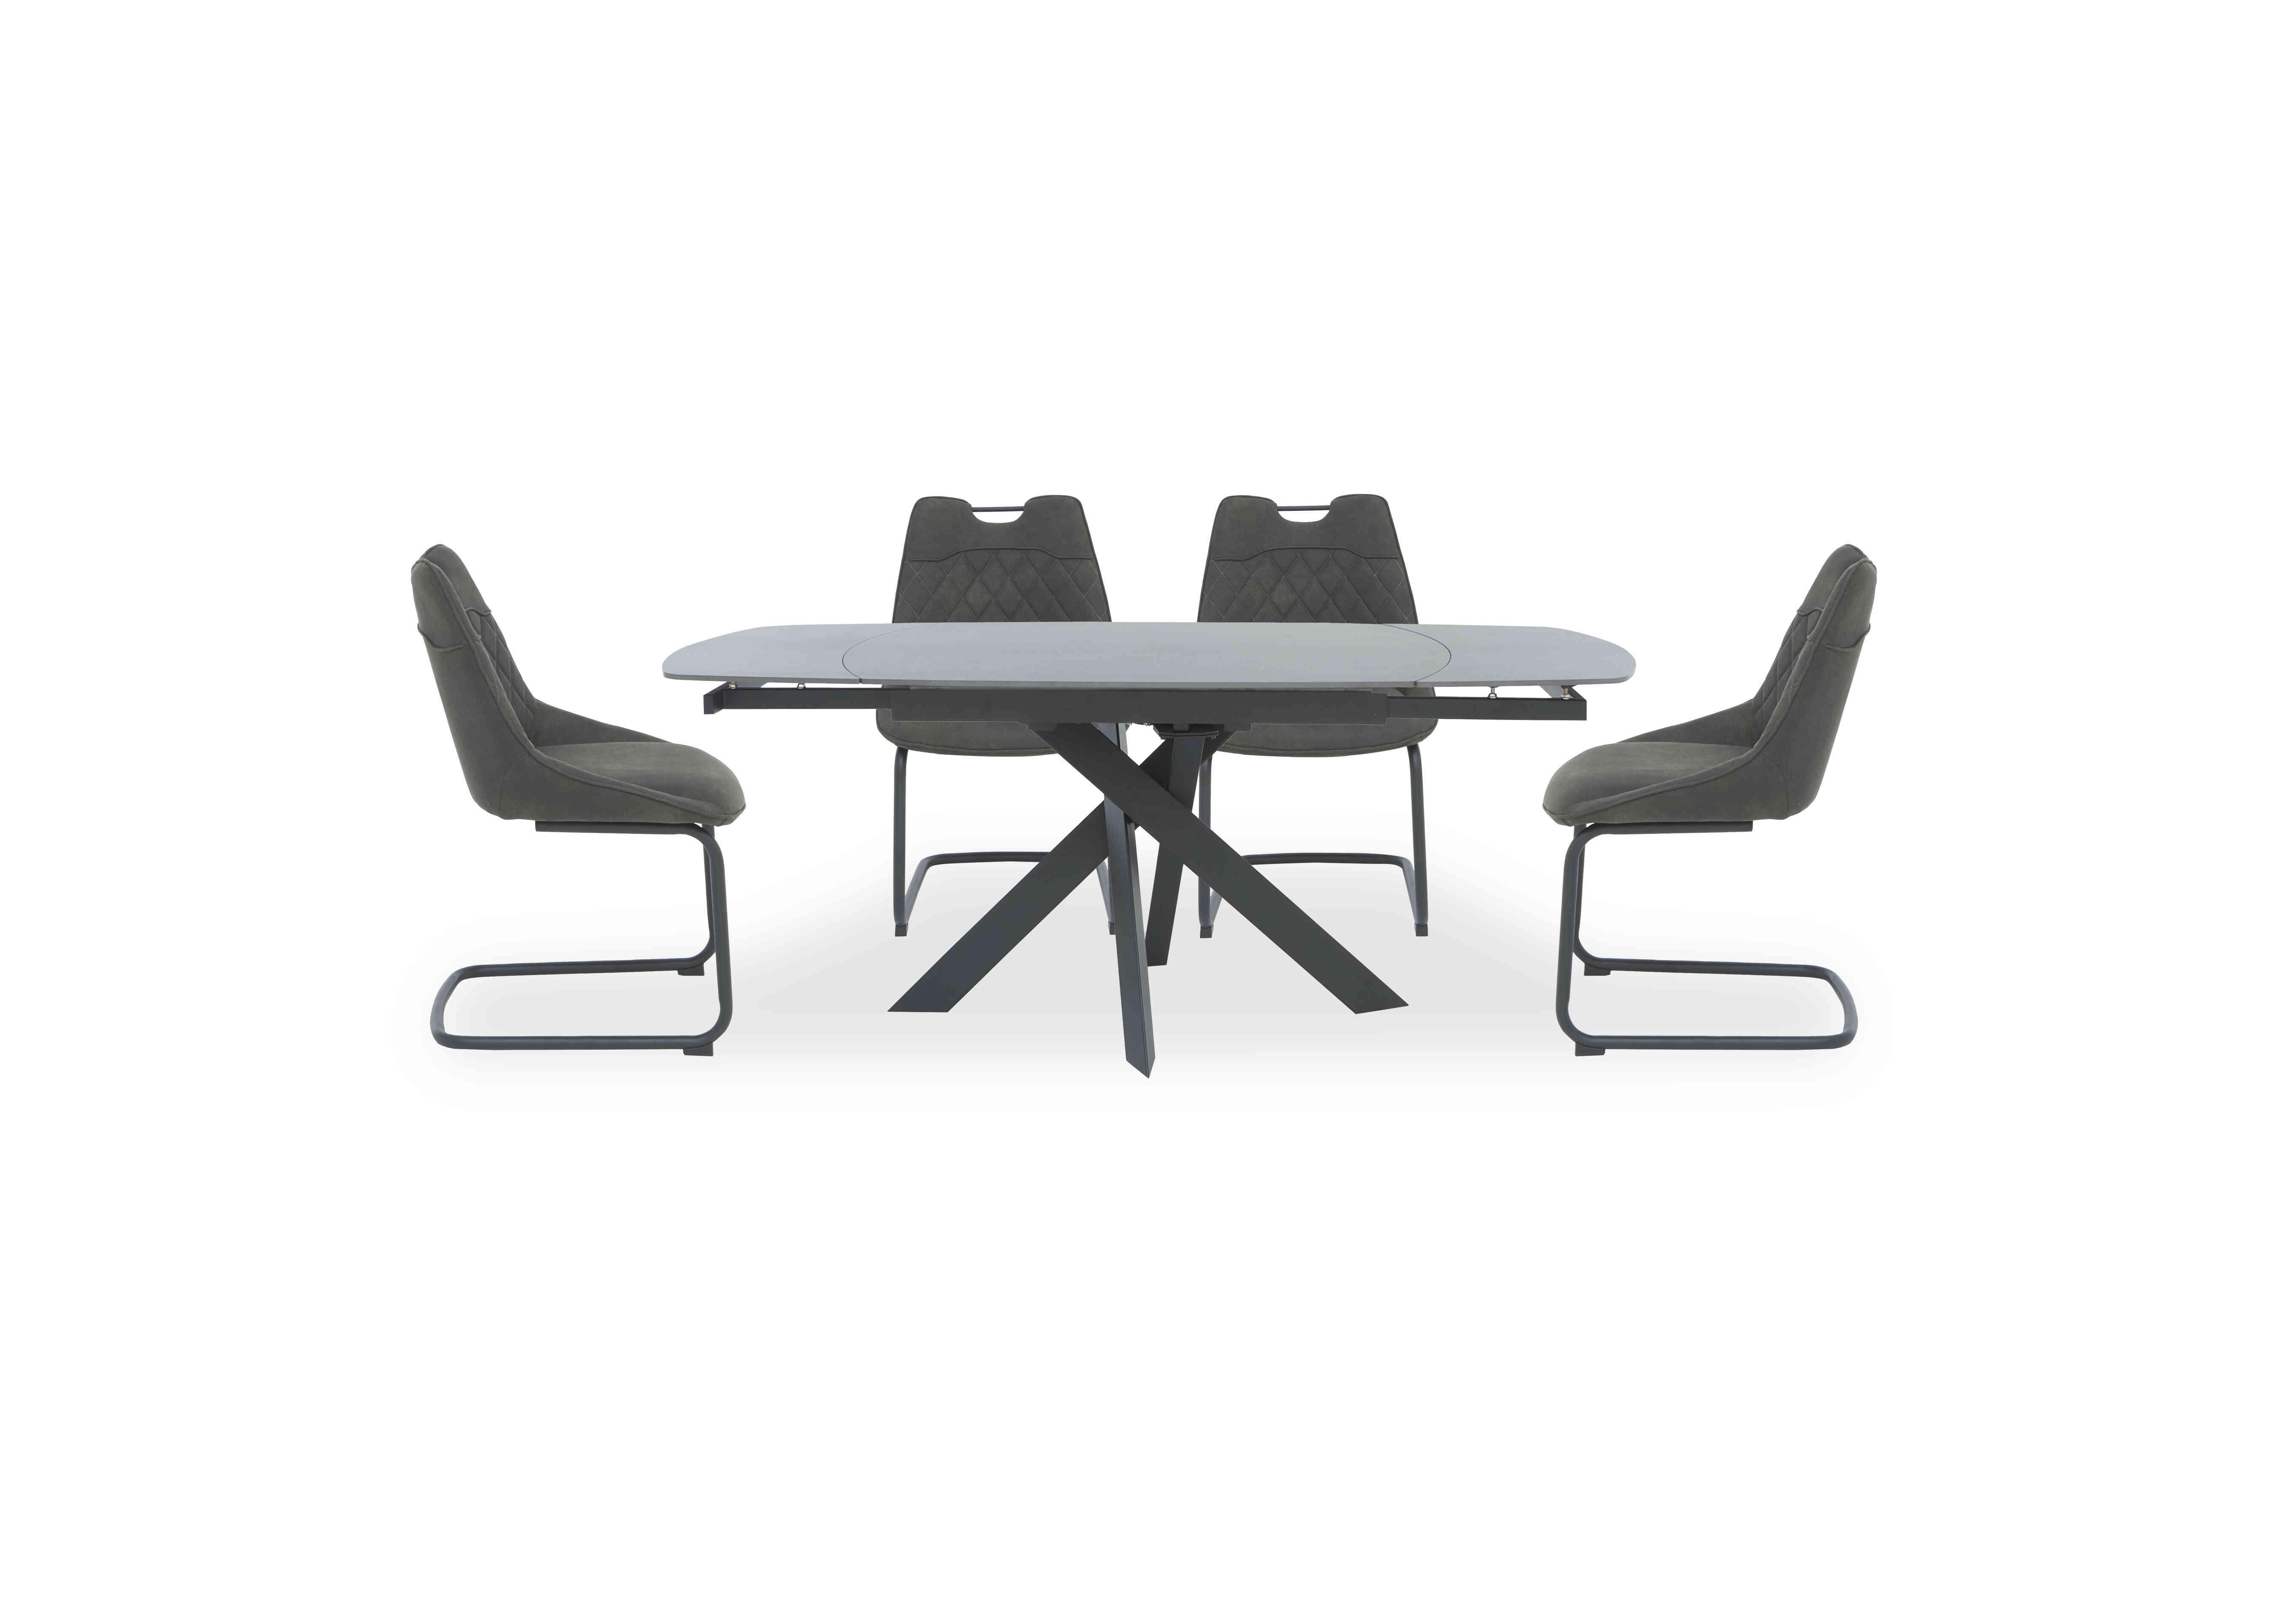 Warrior Grey Swivel Extending Dining Table with 4 Cantilever Dining Chairs in Grey/Grey on Furniture Village